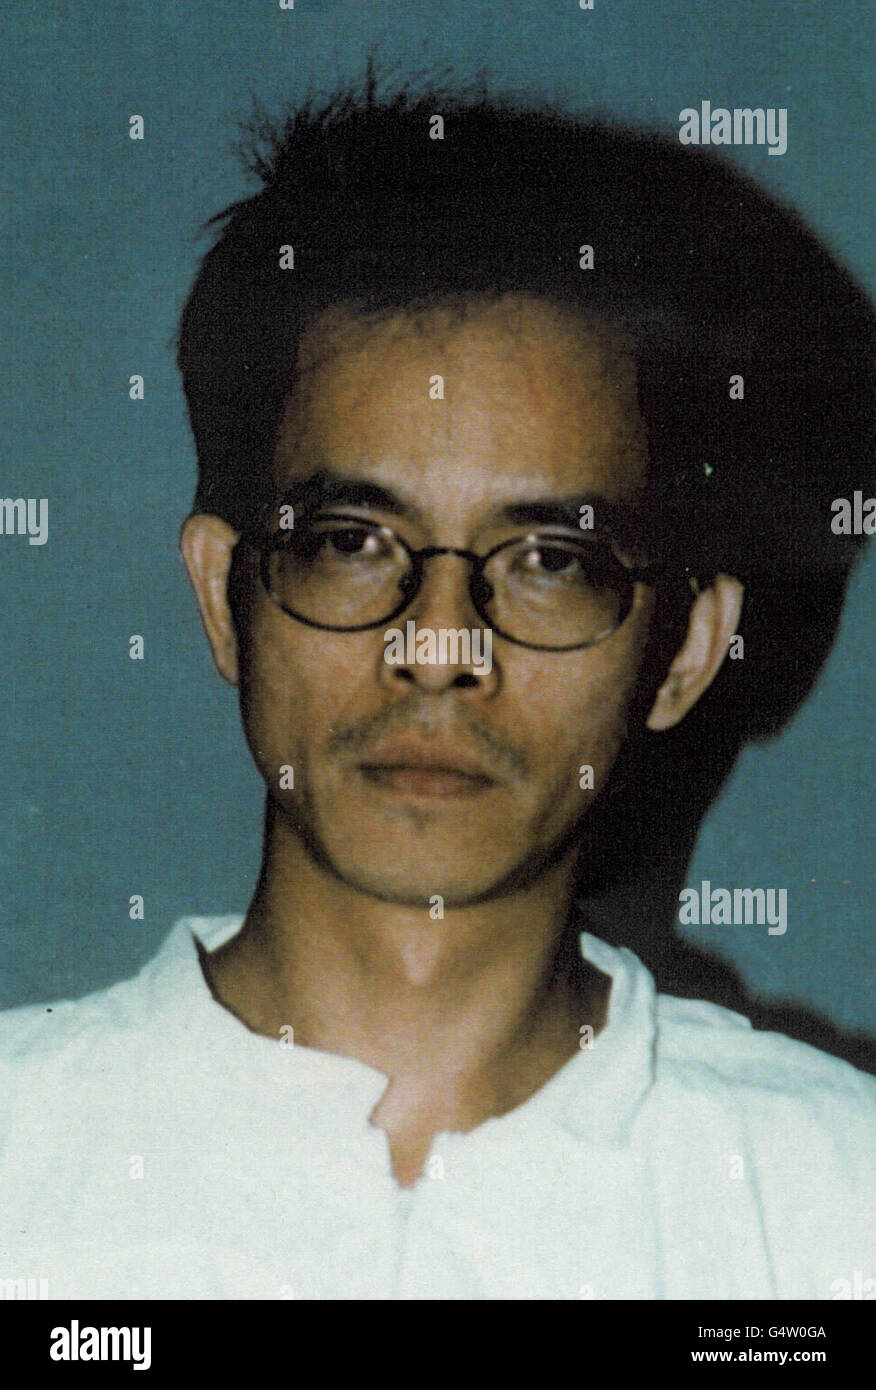 Police issued photo of Leung Fook Seng, jailed for11 years at Kingston Crown Court, resulting from a police action that smashed a lucrative people smuggling and extortion racket by a ruthless gang known as Snakeheads who kidnapped illegal immigrants. * They then demanded ransoms of tens of thousands of pounds from poor relatives in China. The Metropolitan Police claimed a major victory against the gangs at the end of a series of trials which have led to the conviction of 19 Chinese men and women. Stock Photo